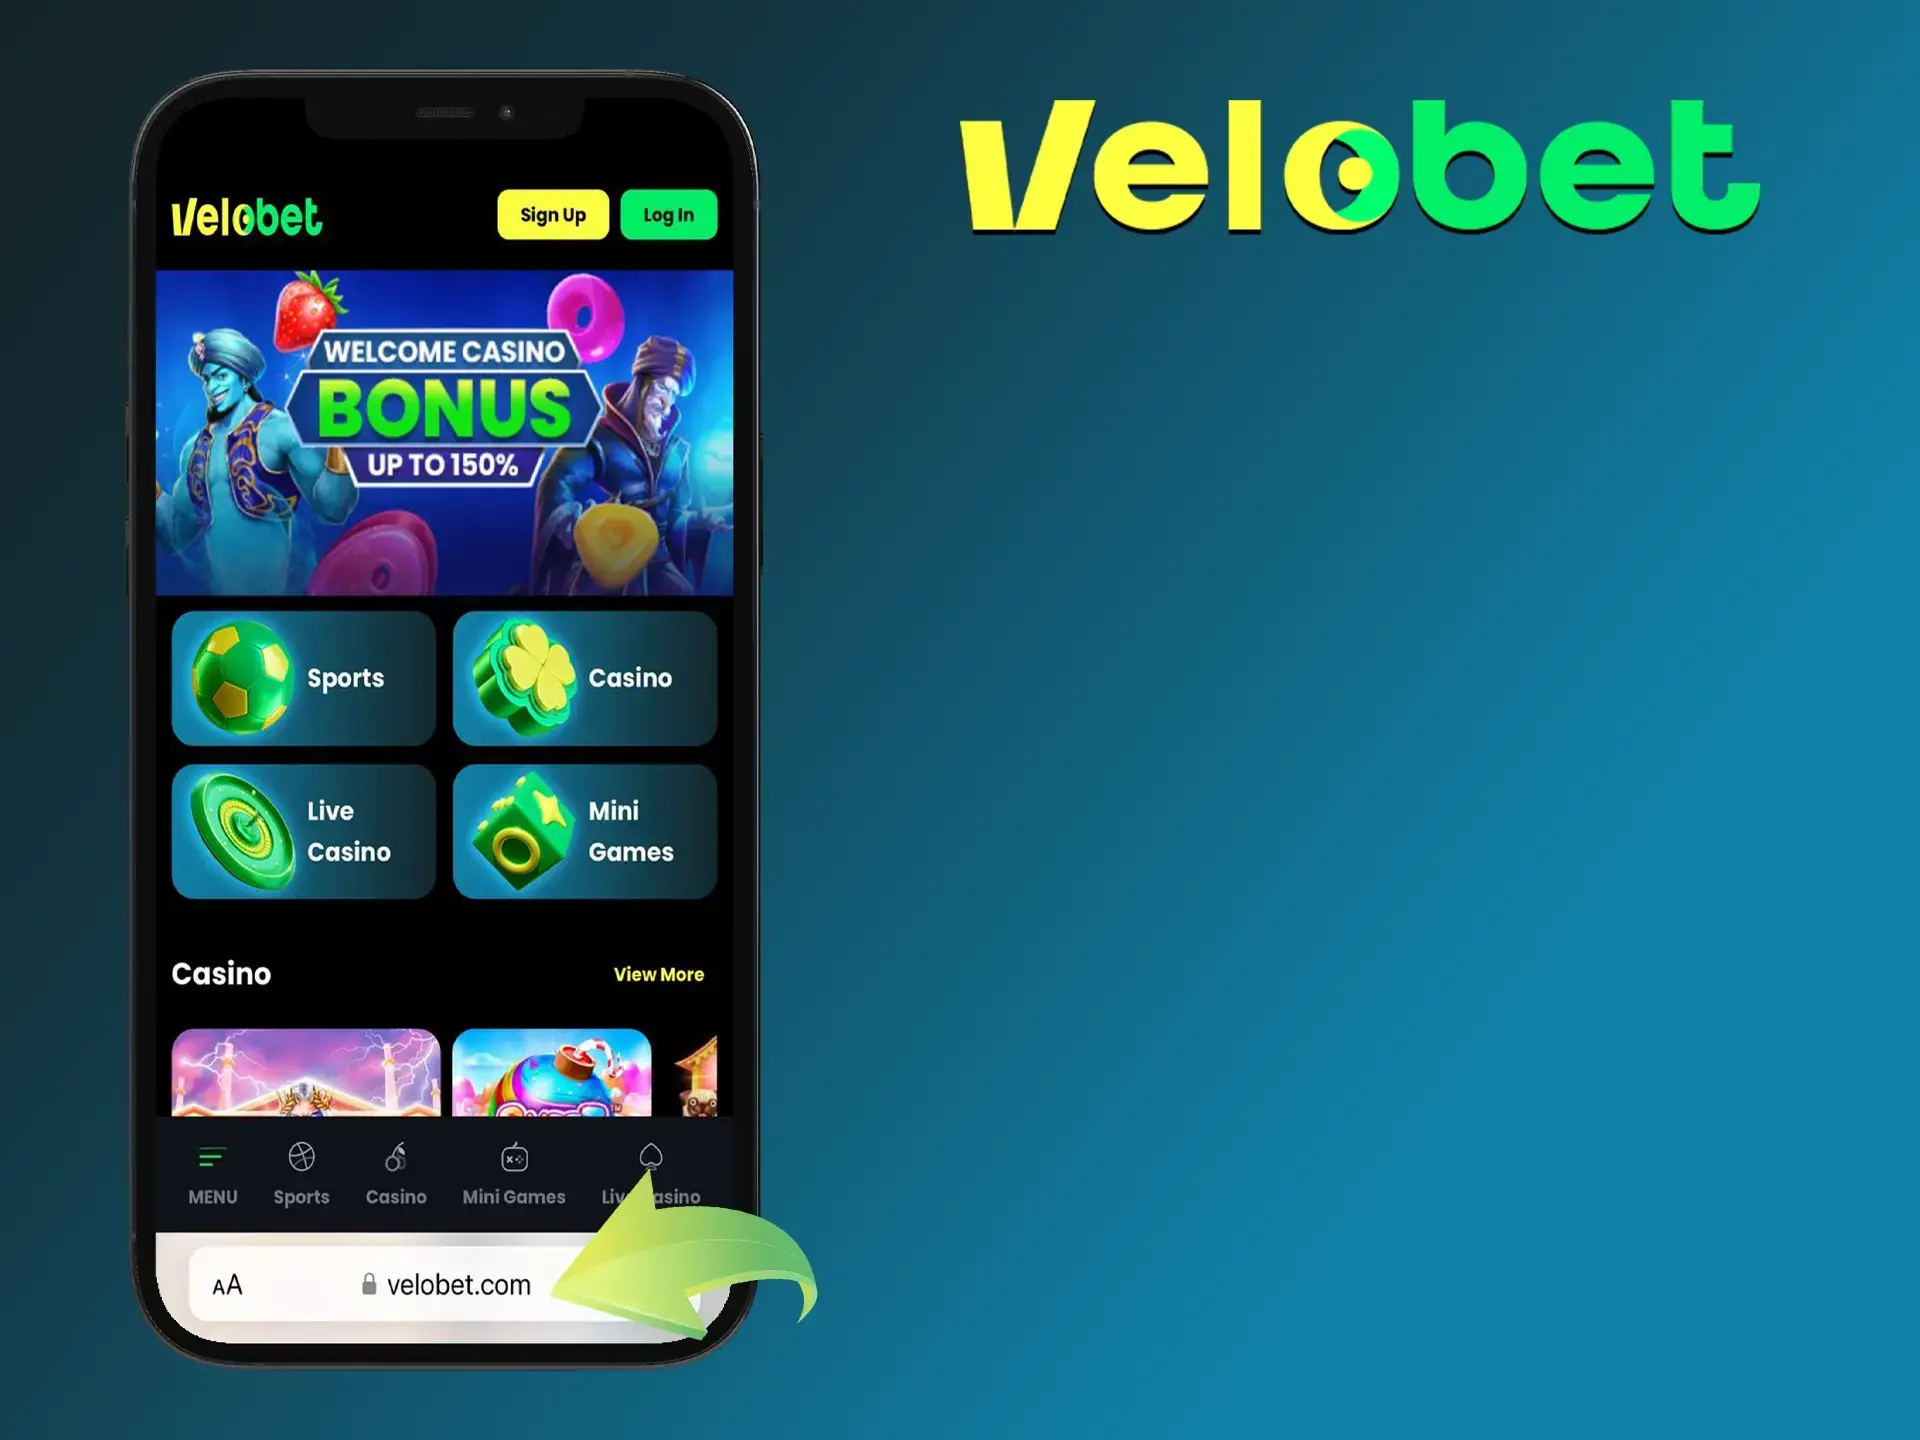 Start your journey into the world of gambling by visiting the Velobet Casino site.